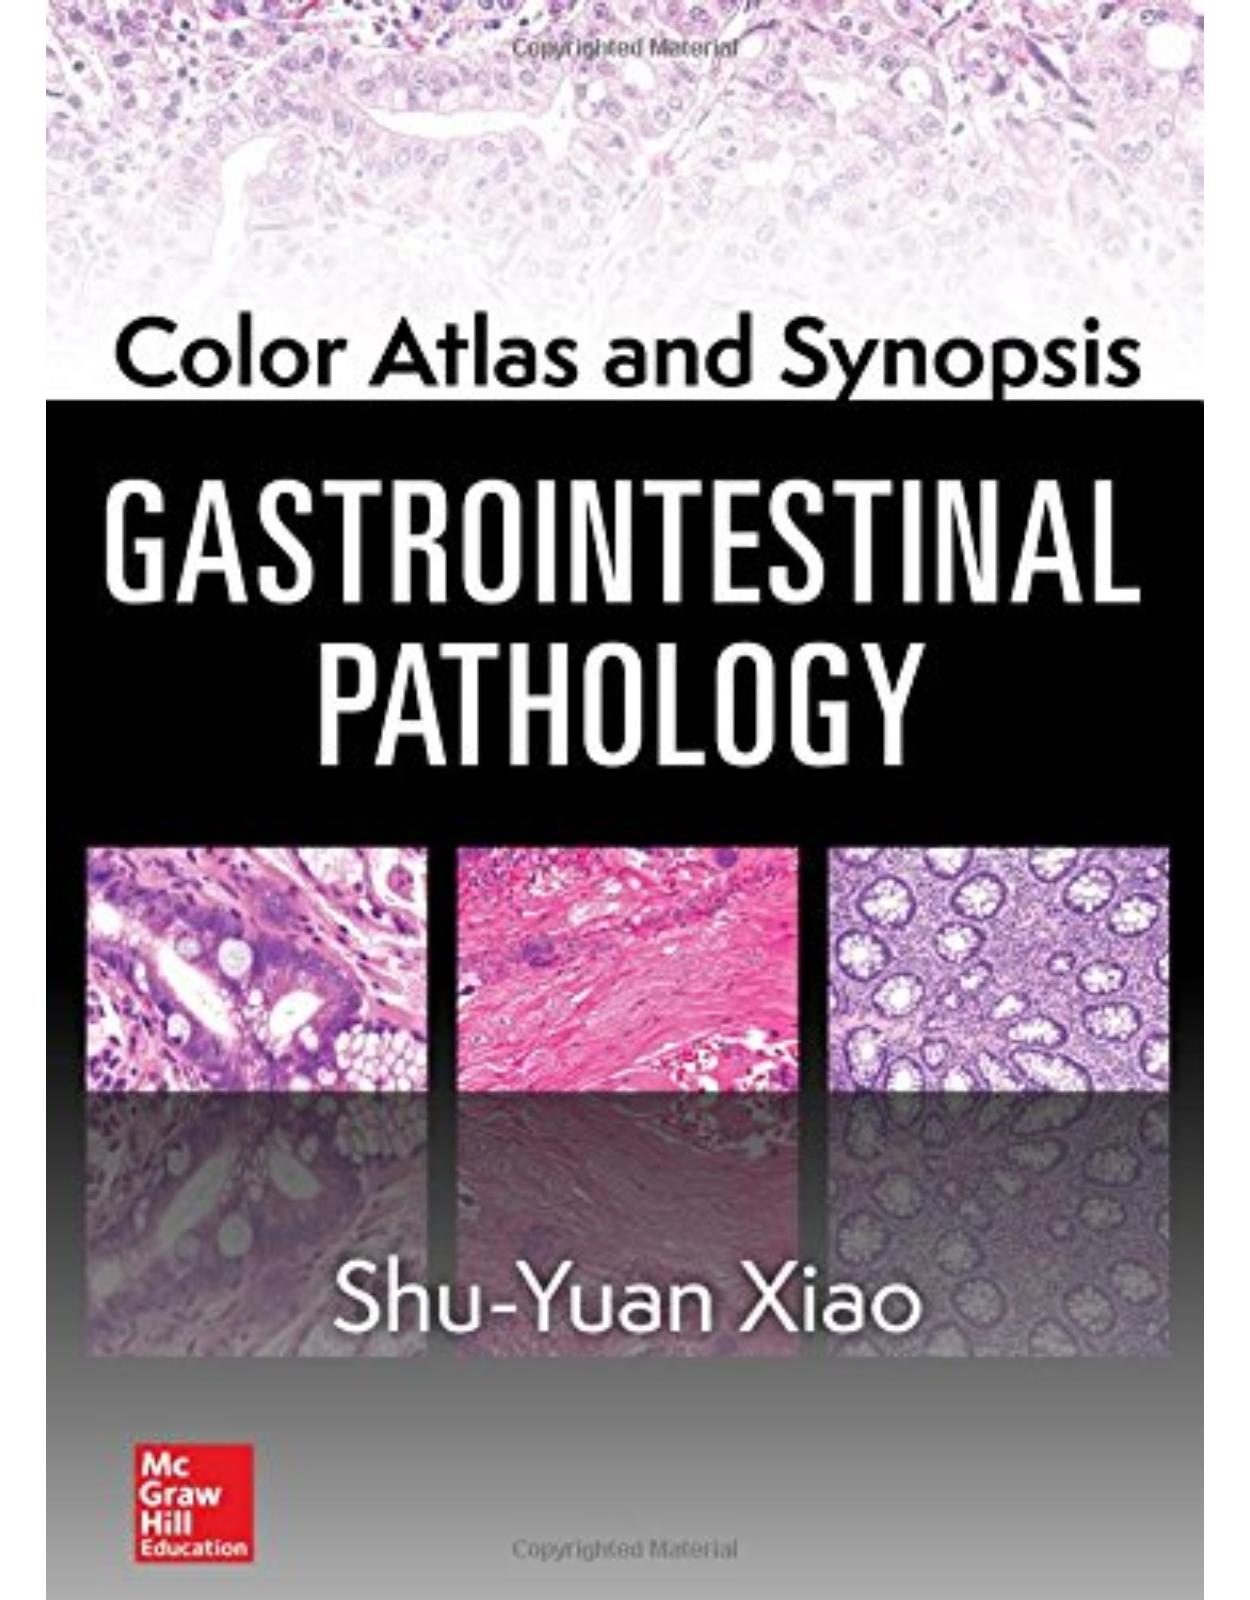 Color Atlas And Synopsis: Gastrointestinal Pathology 